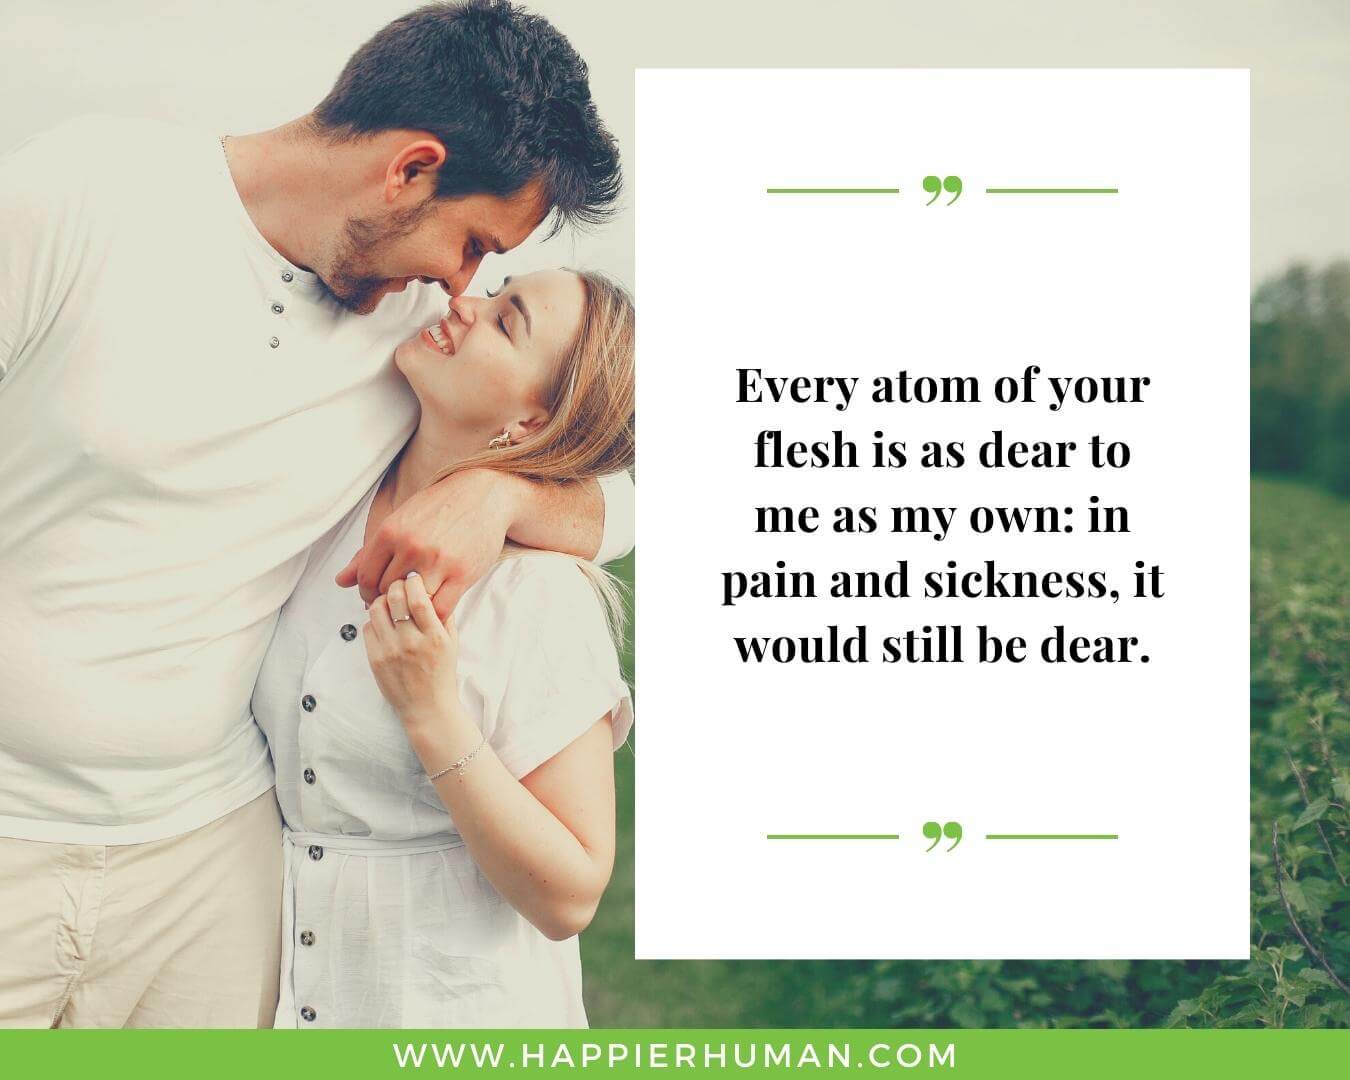 Unconditional Love Quotes for Her - “Every atom of your flesh is as dear to me as my own: in pain and sickness, it would still be dear.”